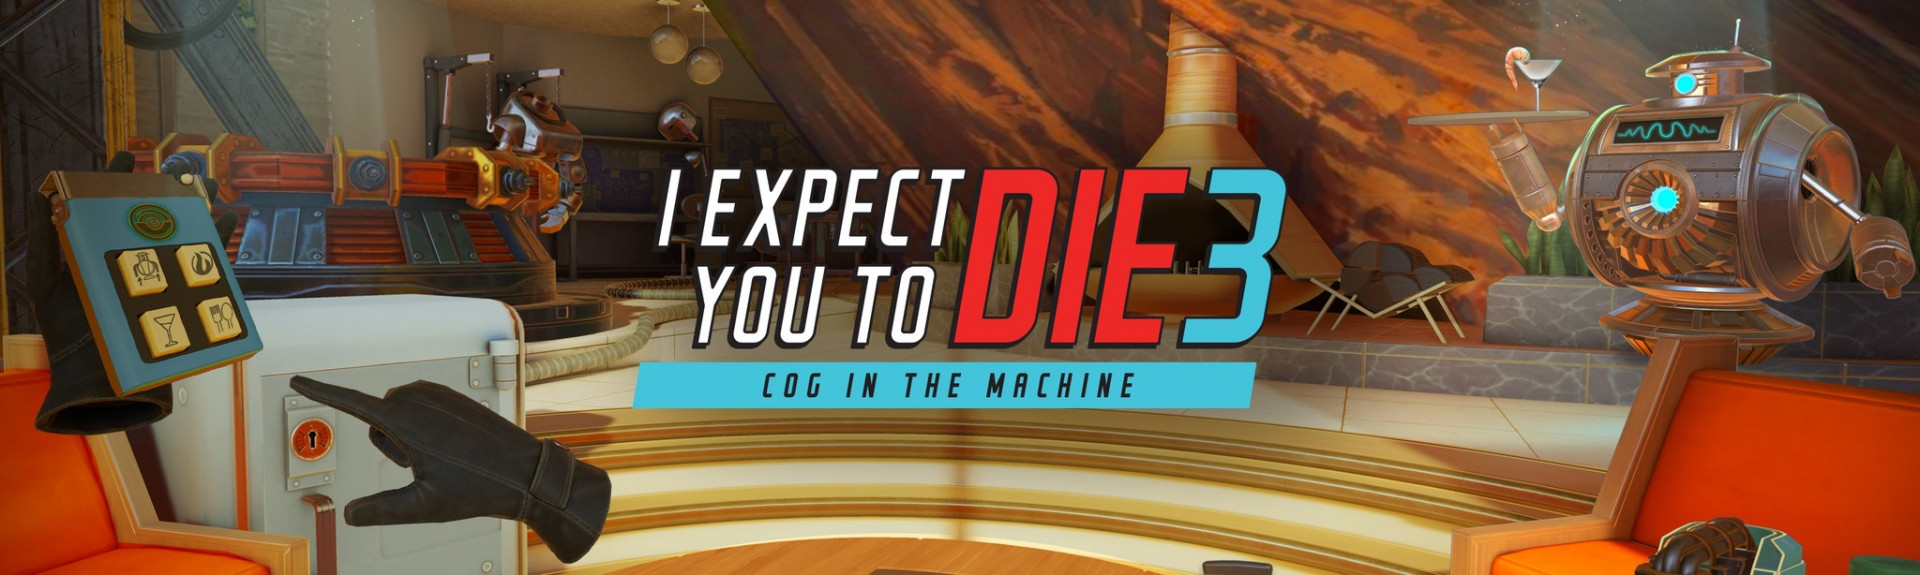 I Expect You to Die 3: Cog in the Machine - ANÁLISIS